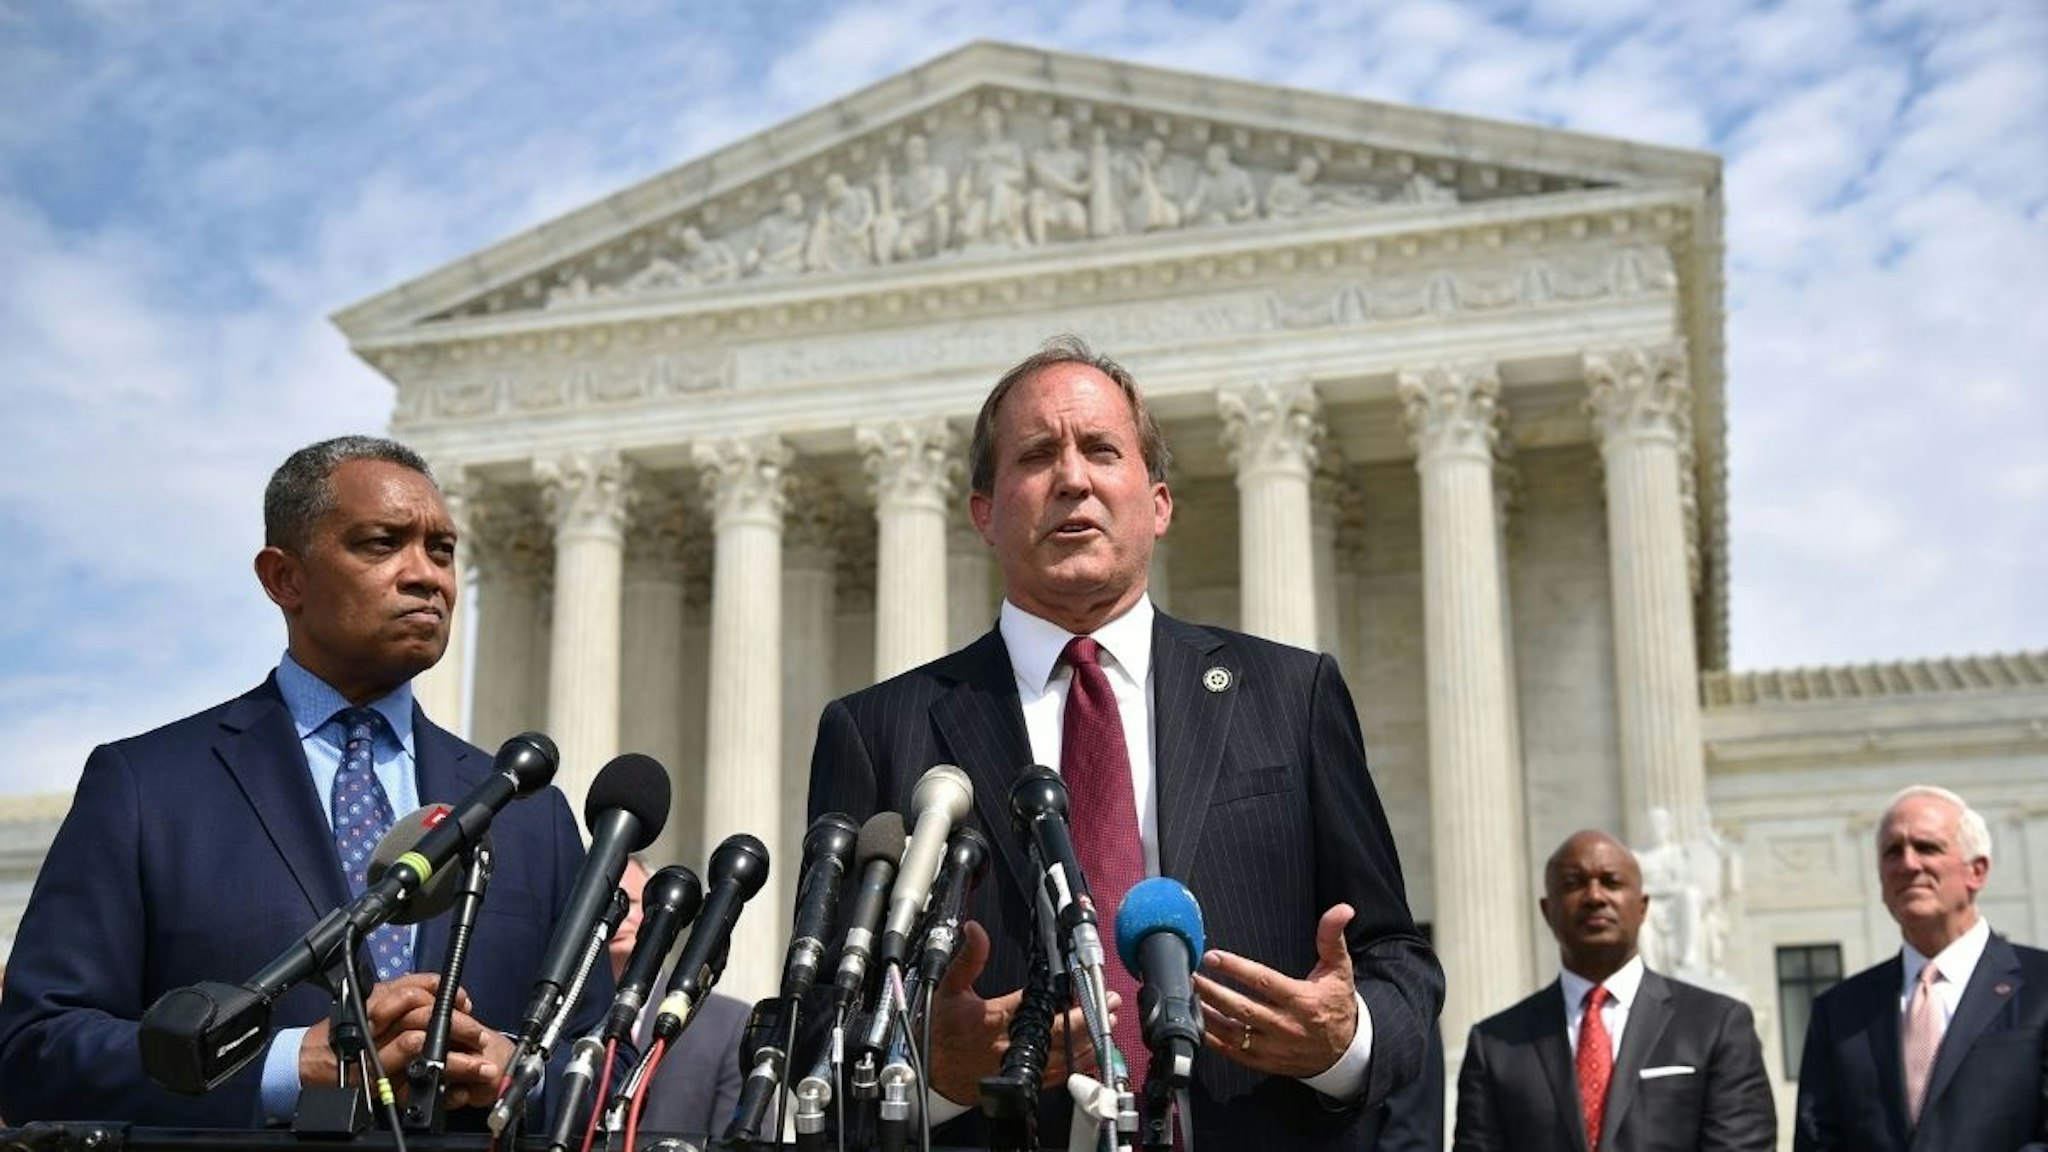 District of Columbia Attorney General Karl Racine (L) and Texas Attorney General Ken Paxton speak during the launch of an antitrust investigation into large tech companies outside of the US Supreme Court in Washington, DC on September 9, 2019.